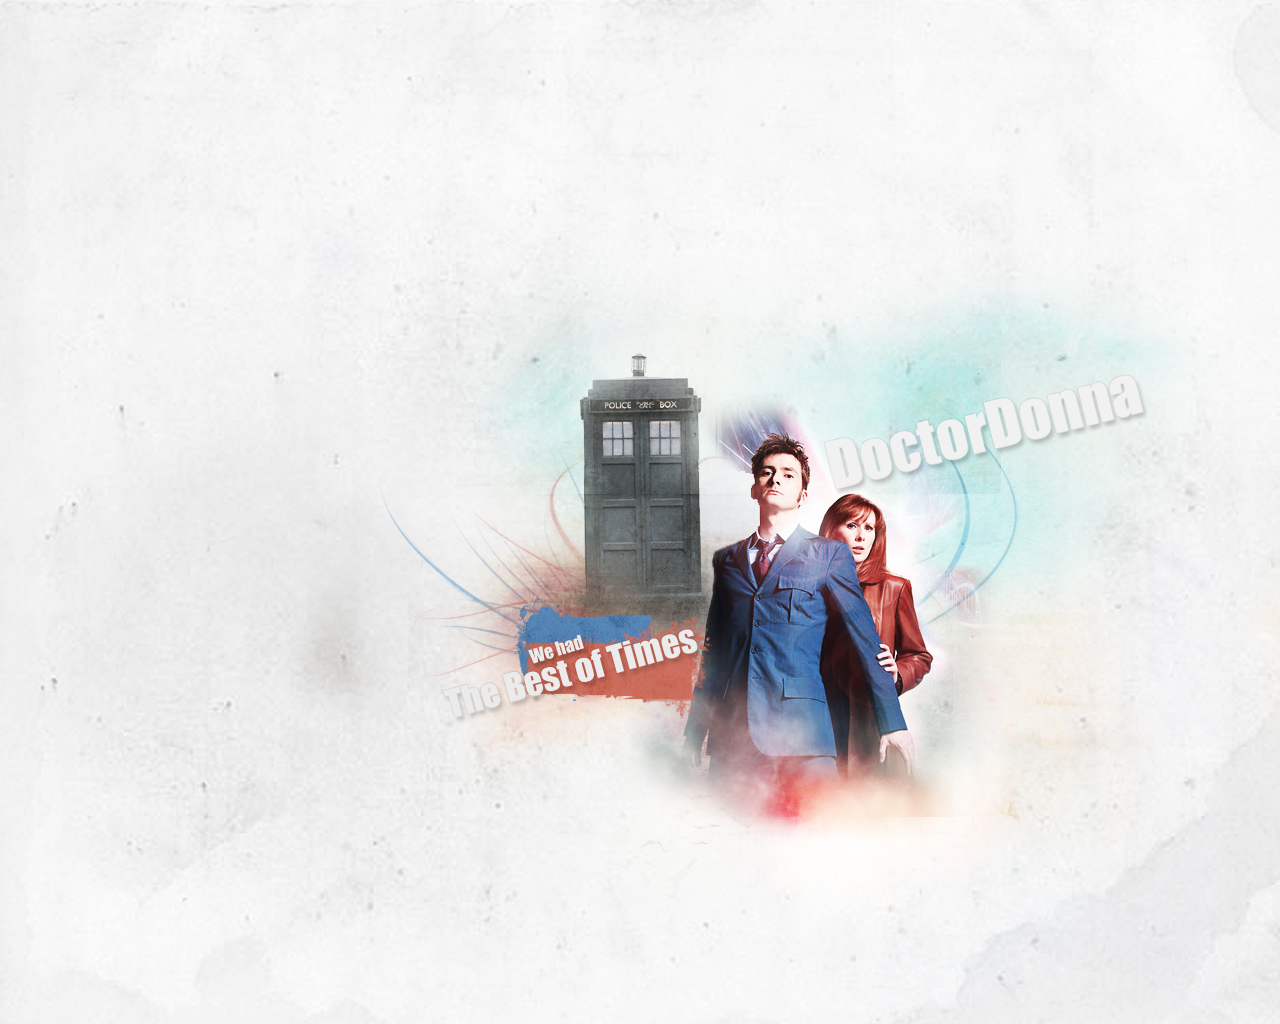 Doctor Who Wallpaper 2